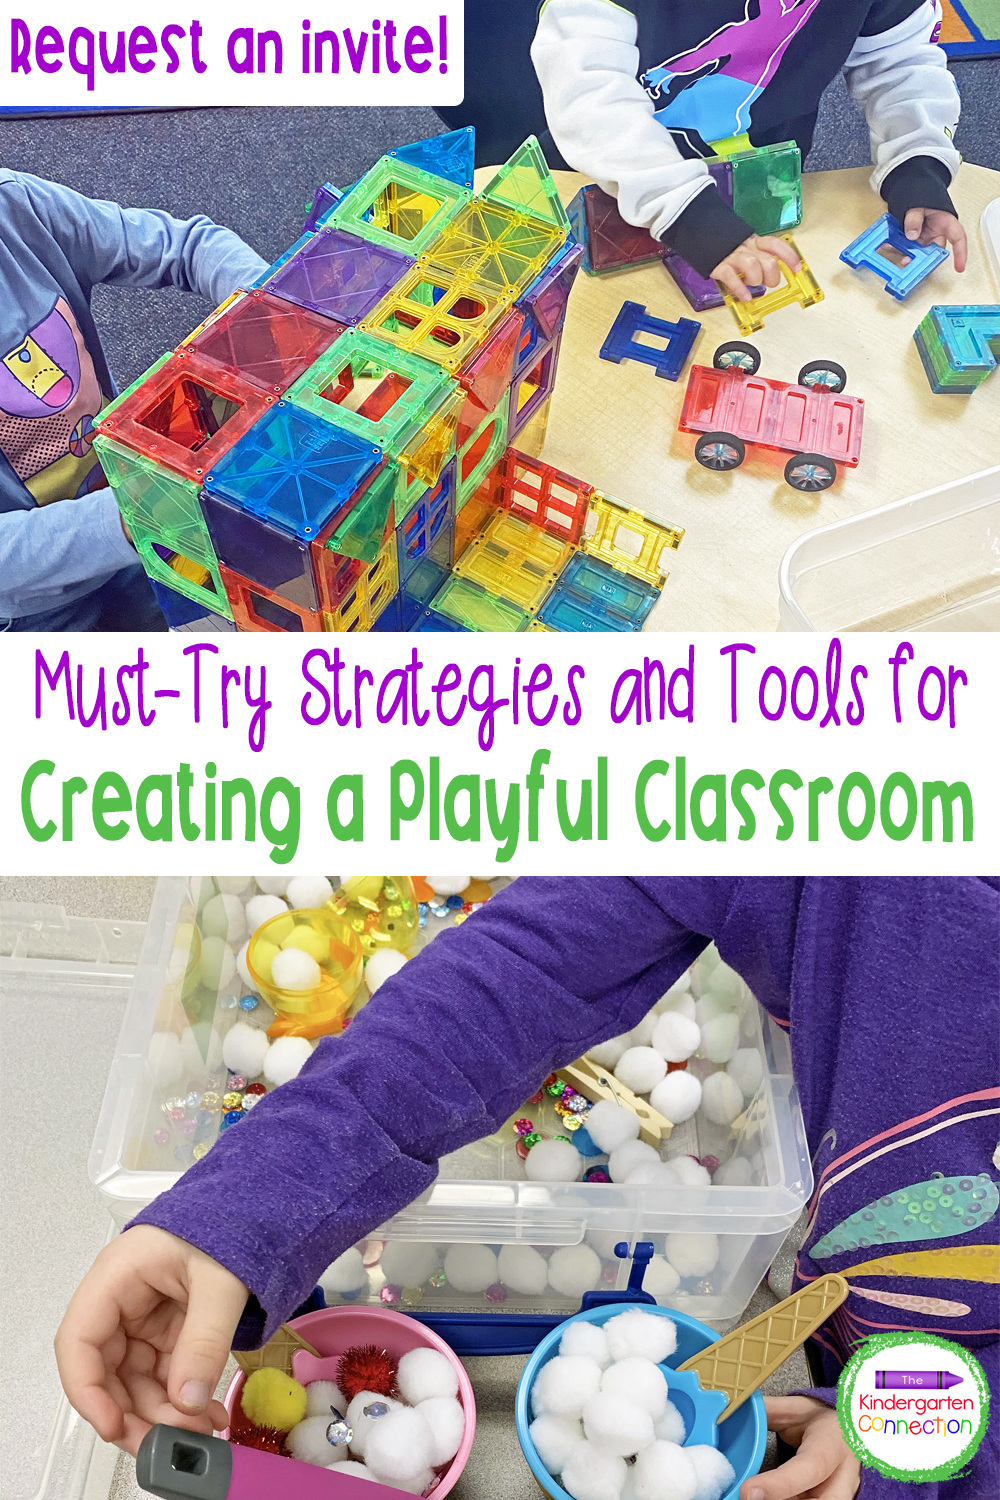 Must-Try Strategies and Tools for Creating a Playful Classroom